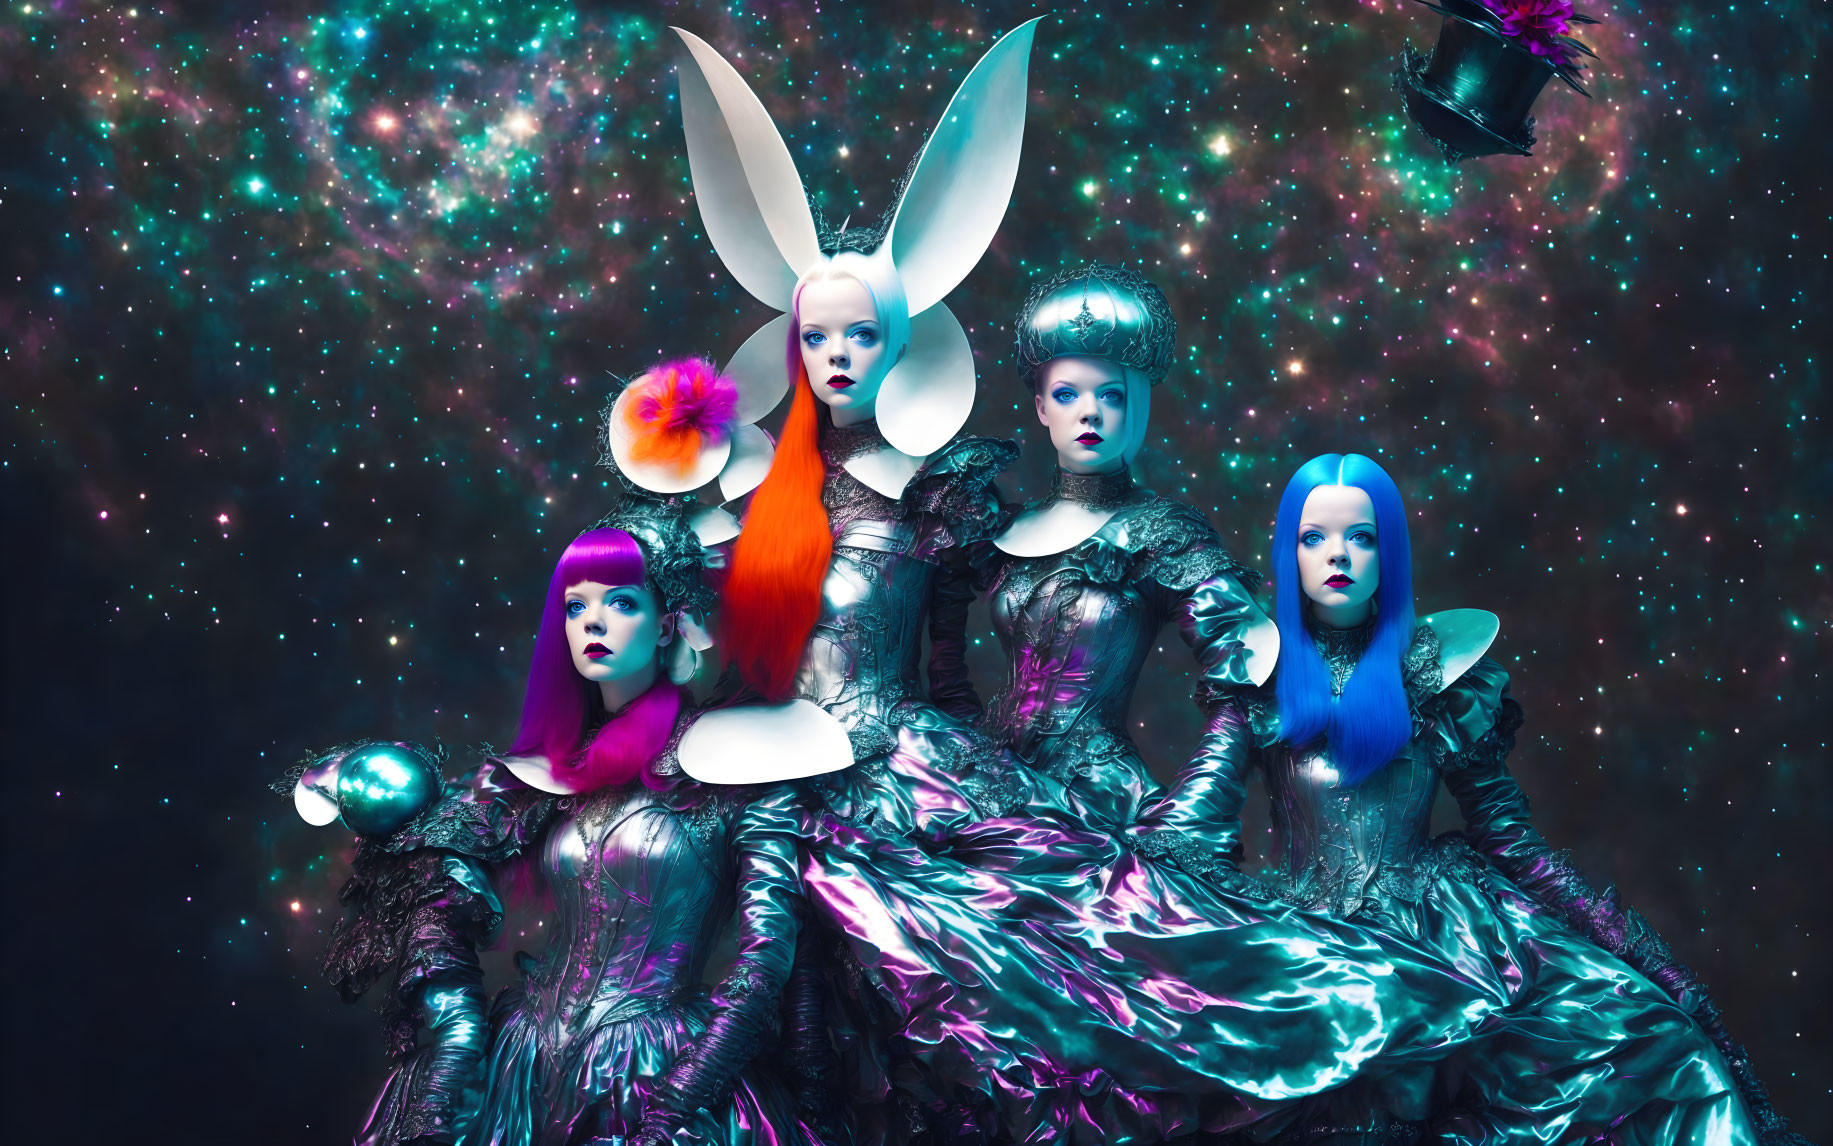 Avant-garde metallic dresses and colorful wigs on models against cosmic backdrop